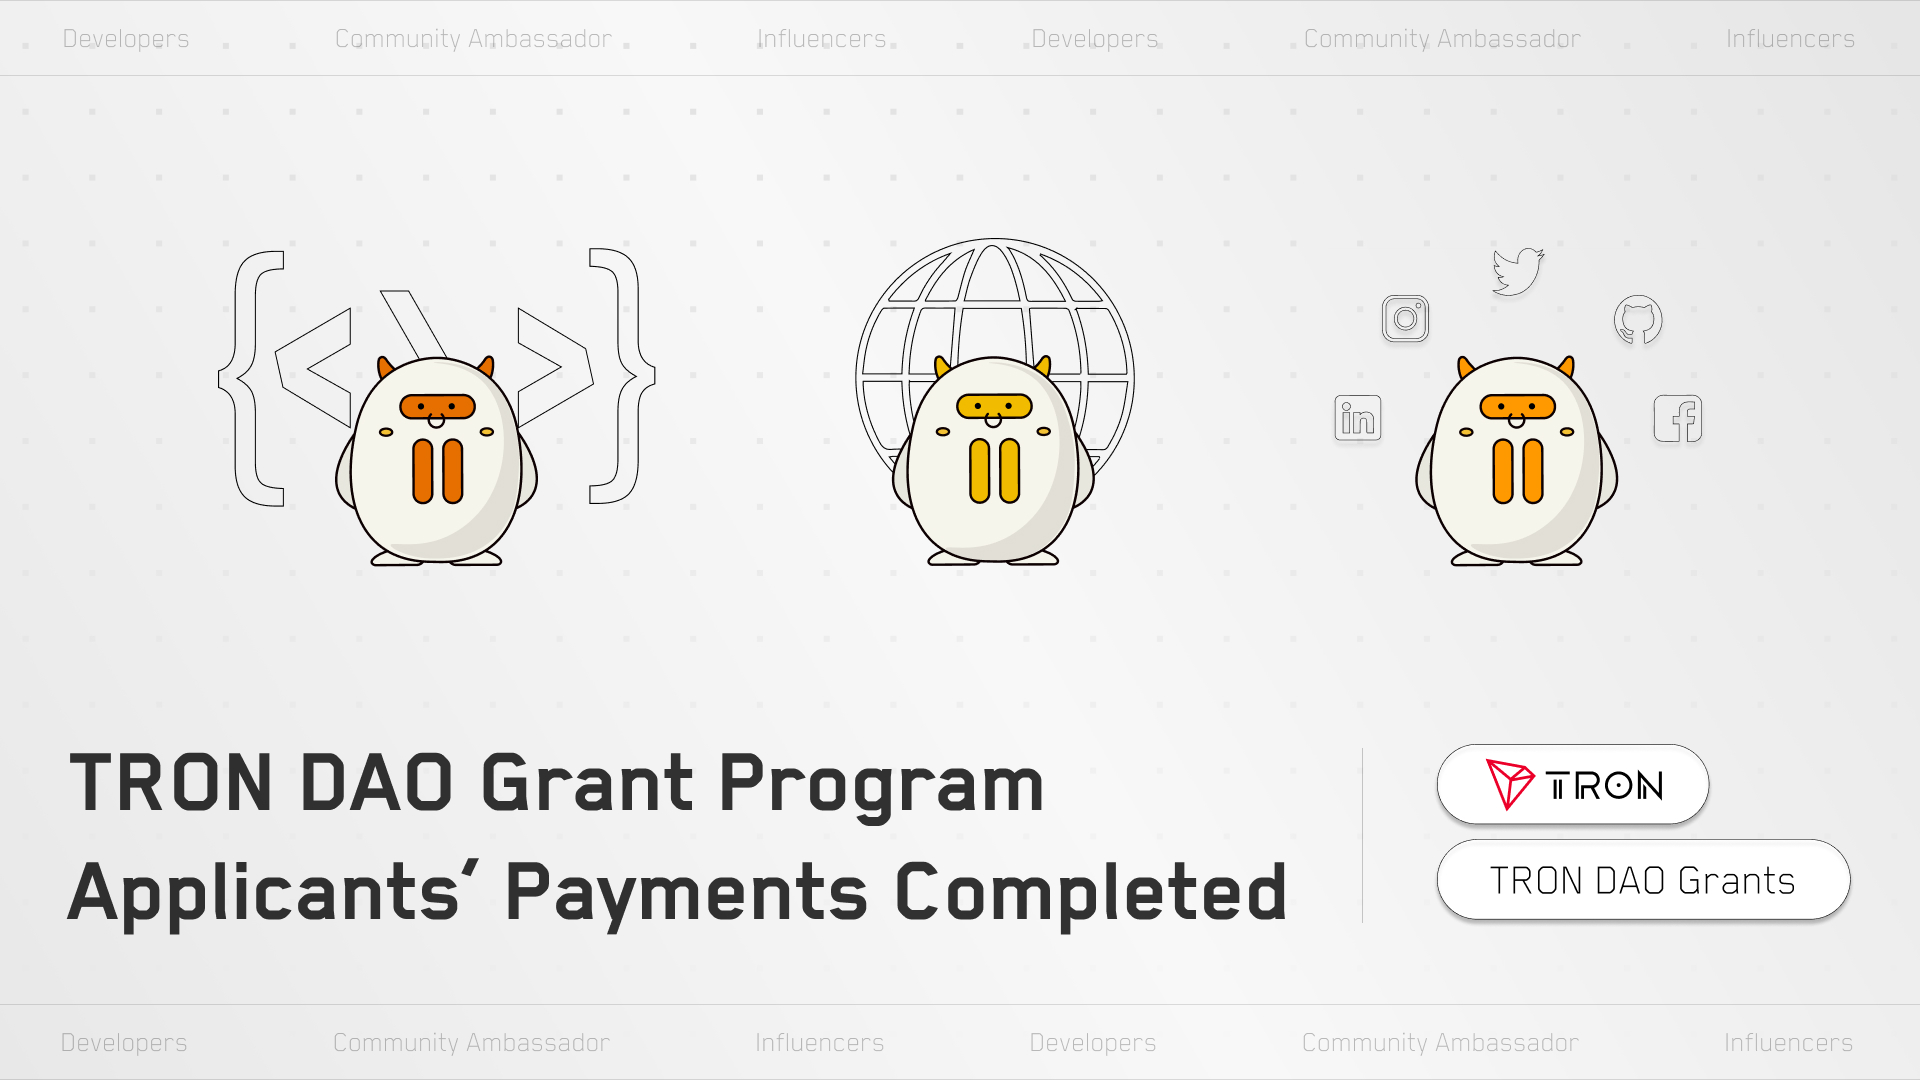 Funds for the TRON DAO Grant Program Distributed to Applicants